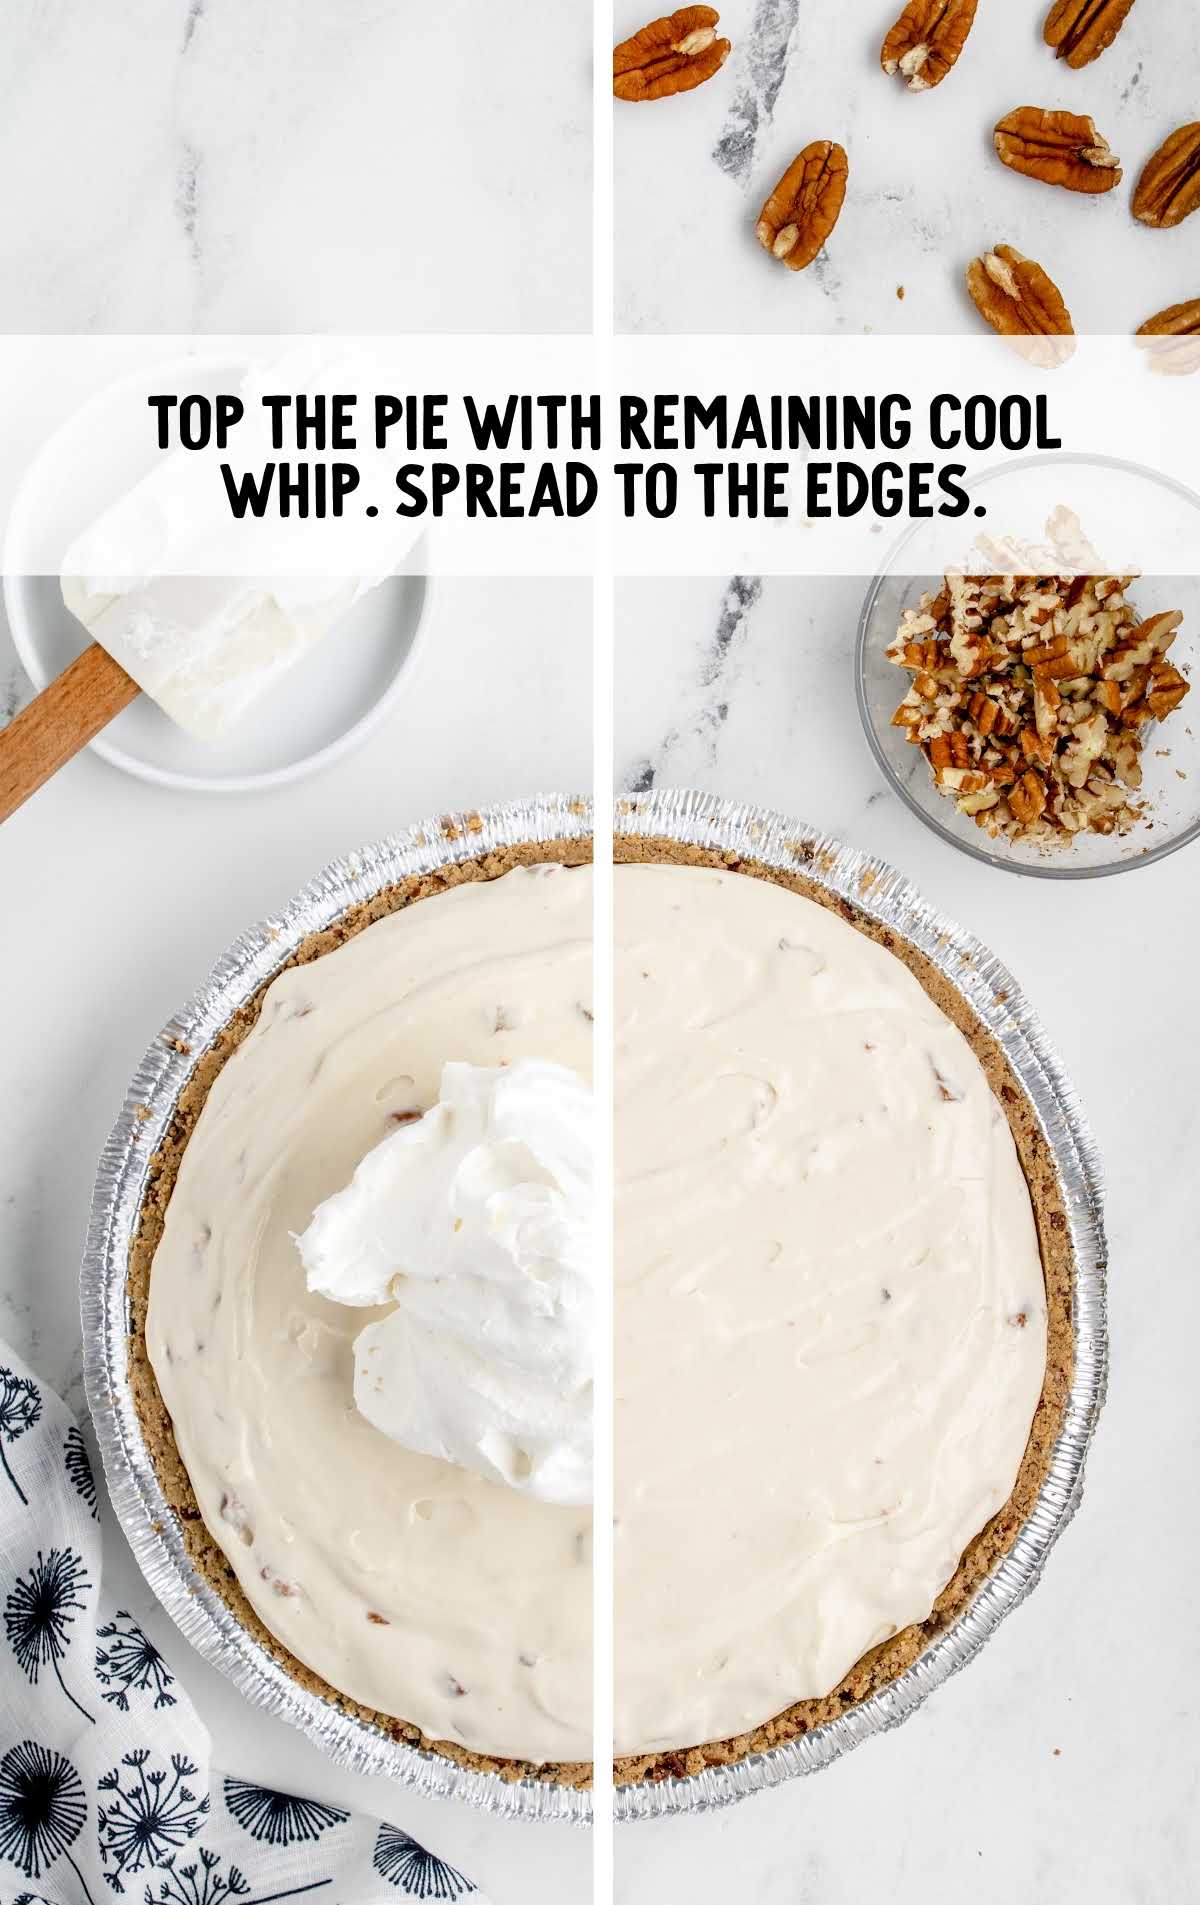 cool whip topped on top of the pie and spread on the edges